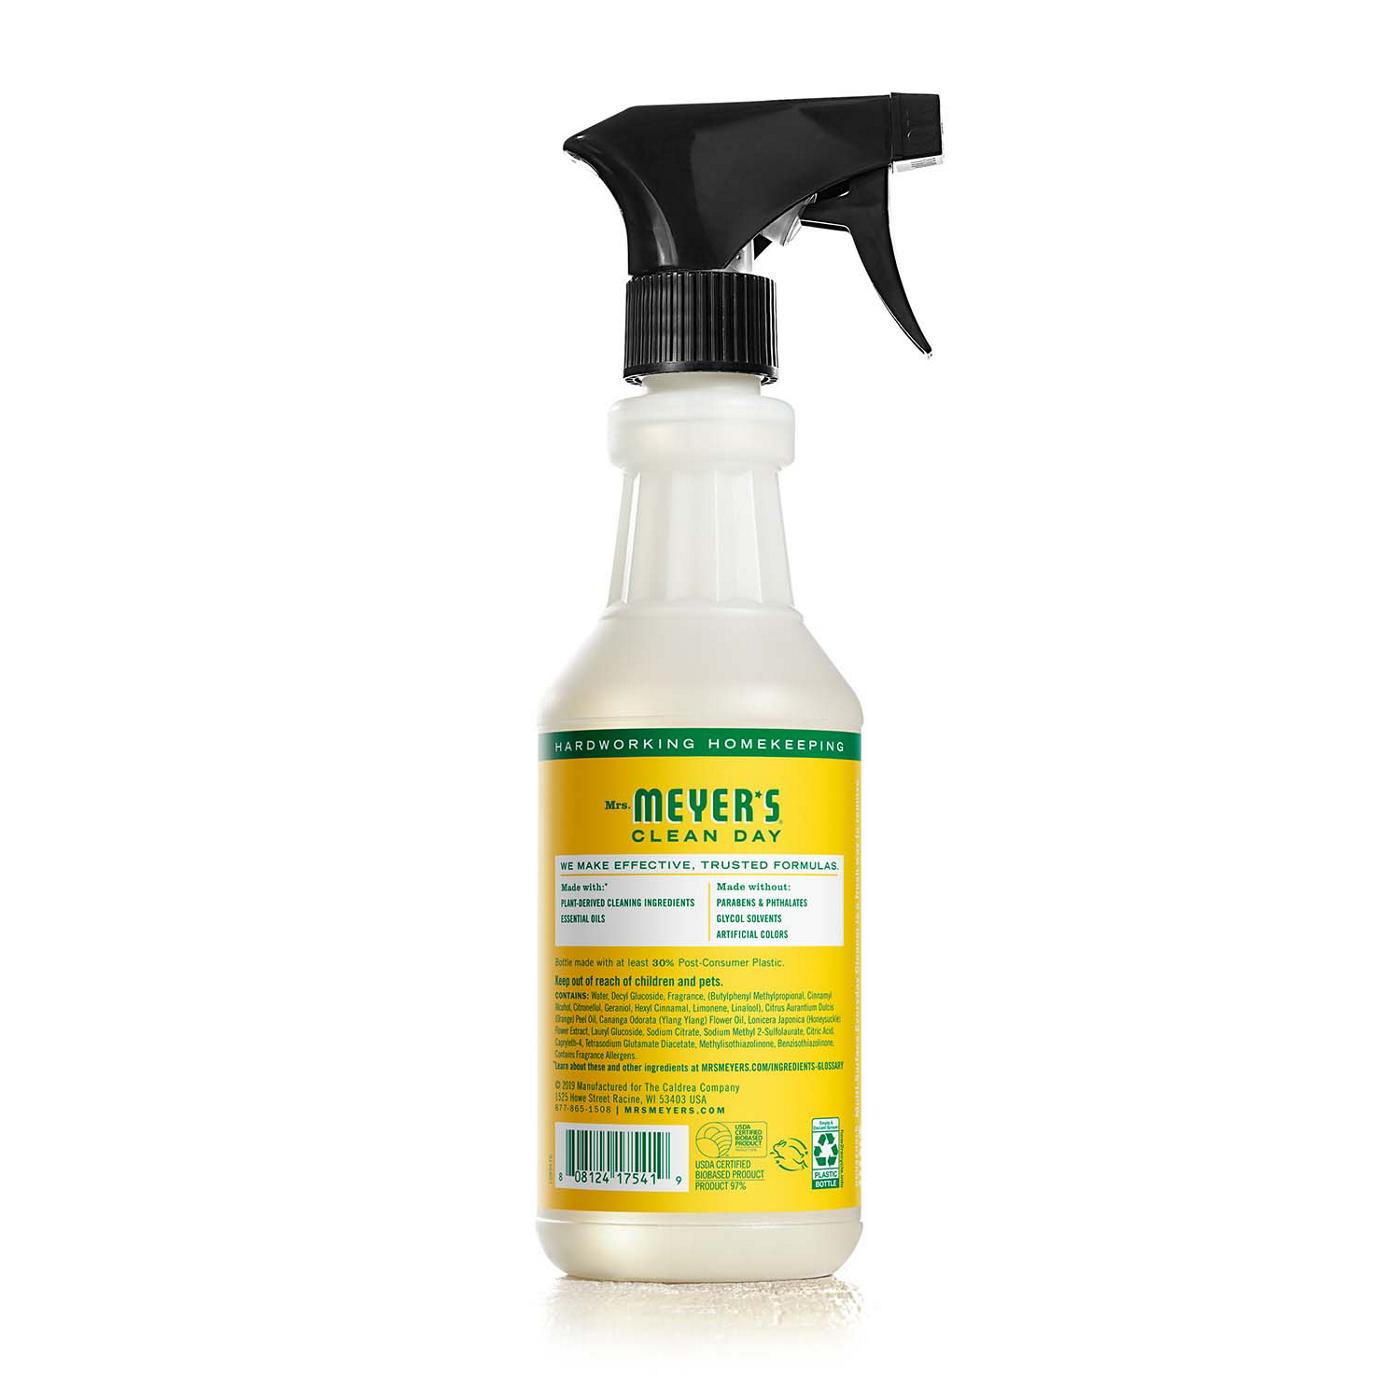 Mrs. Meyer's Clean Day Honeysuckle Multi Surface Cleaner Spray; image 6 of 6